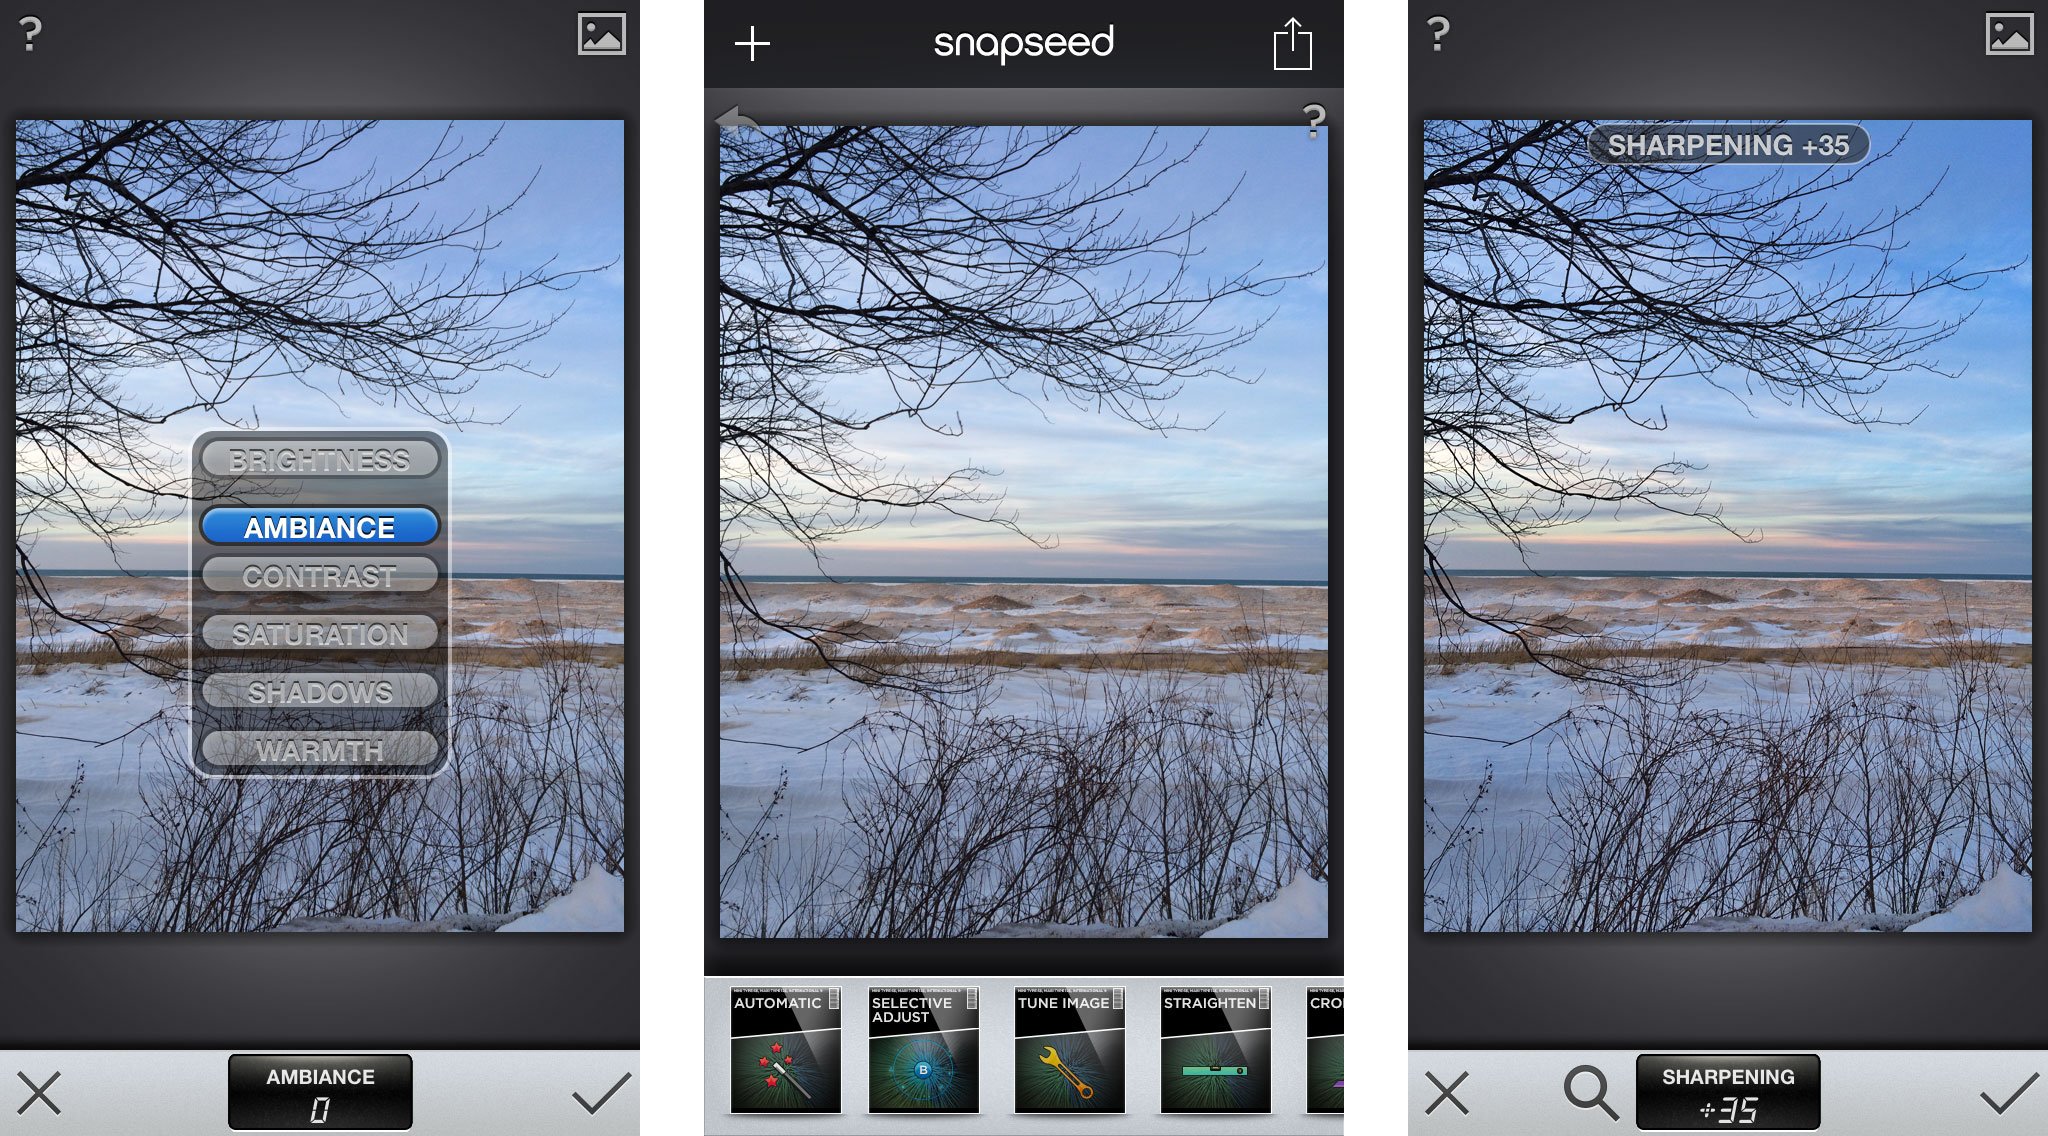 Make your iPhone better than a DSLR with these six apps: Snapseed 